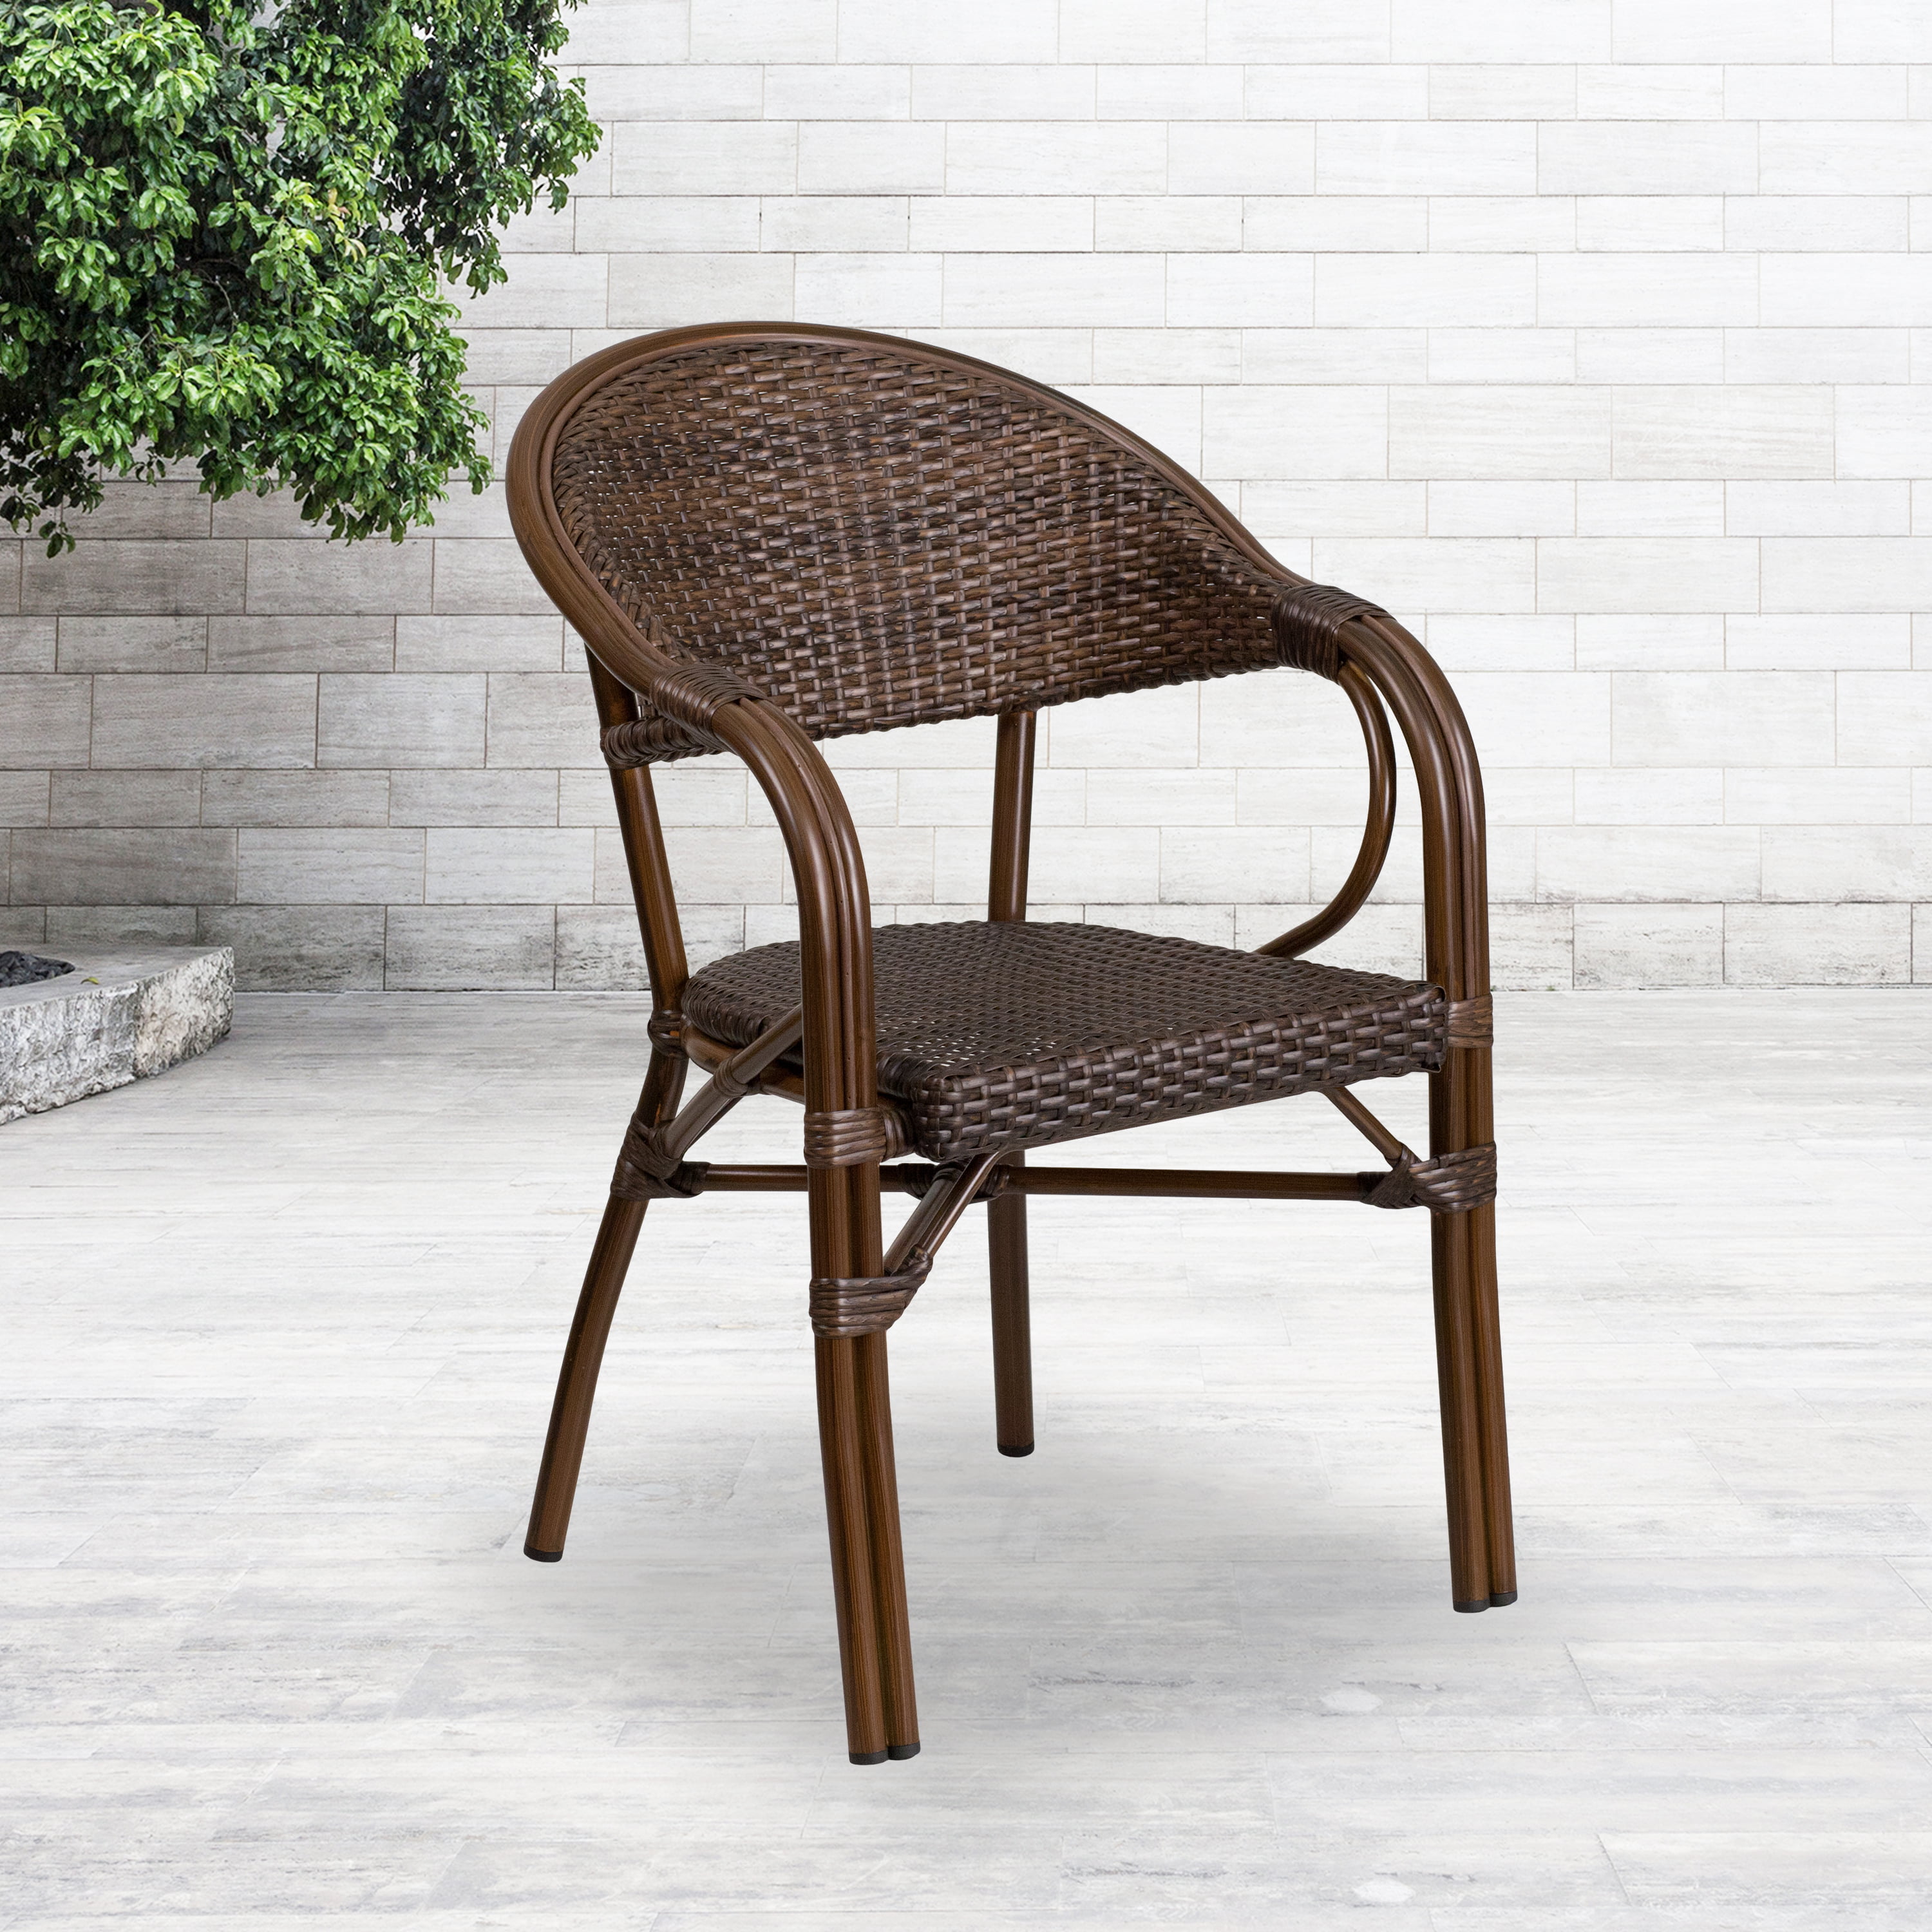 Flash Furniture Milano Series Cocoa Rattan Restaurant Patio Chair with Bamboo-Aluminum Frame - image 1 of 11